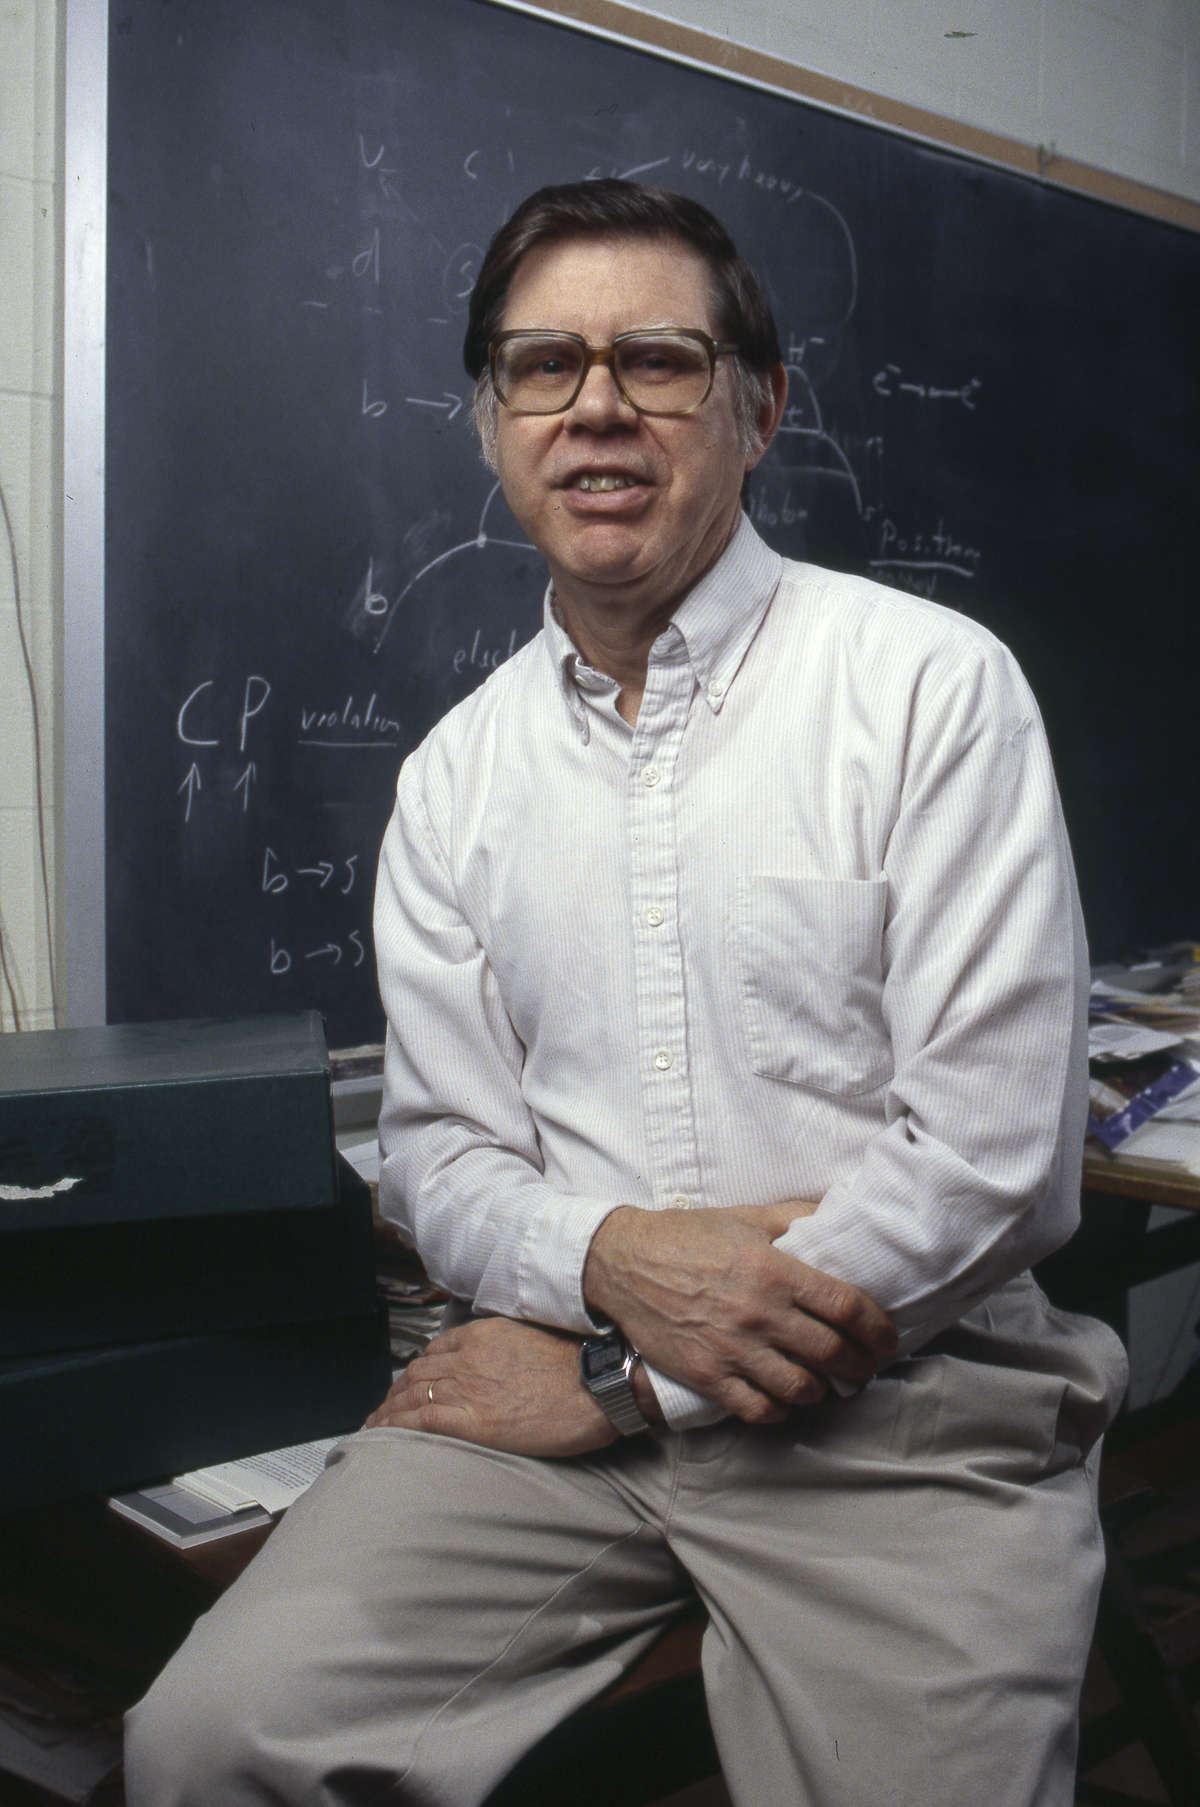 Edward Thorndike seated at the edge of a desk and smiling at the camera with a blackboard full of equations in the background.